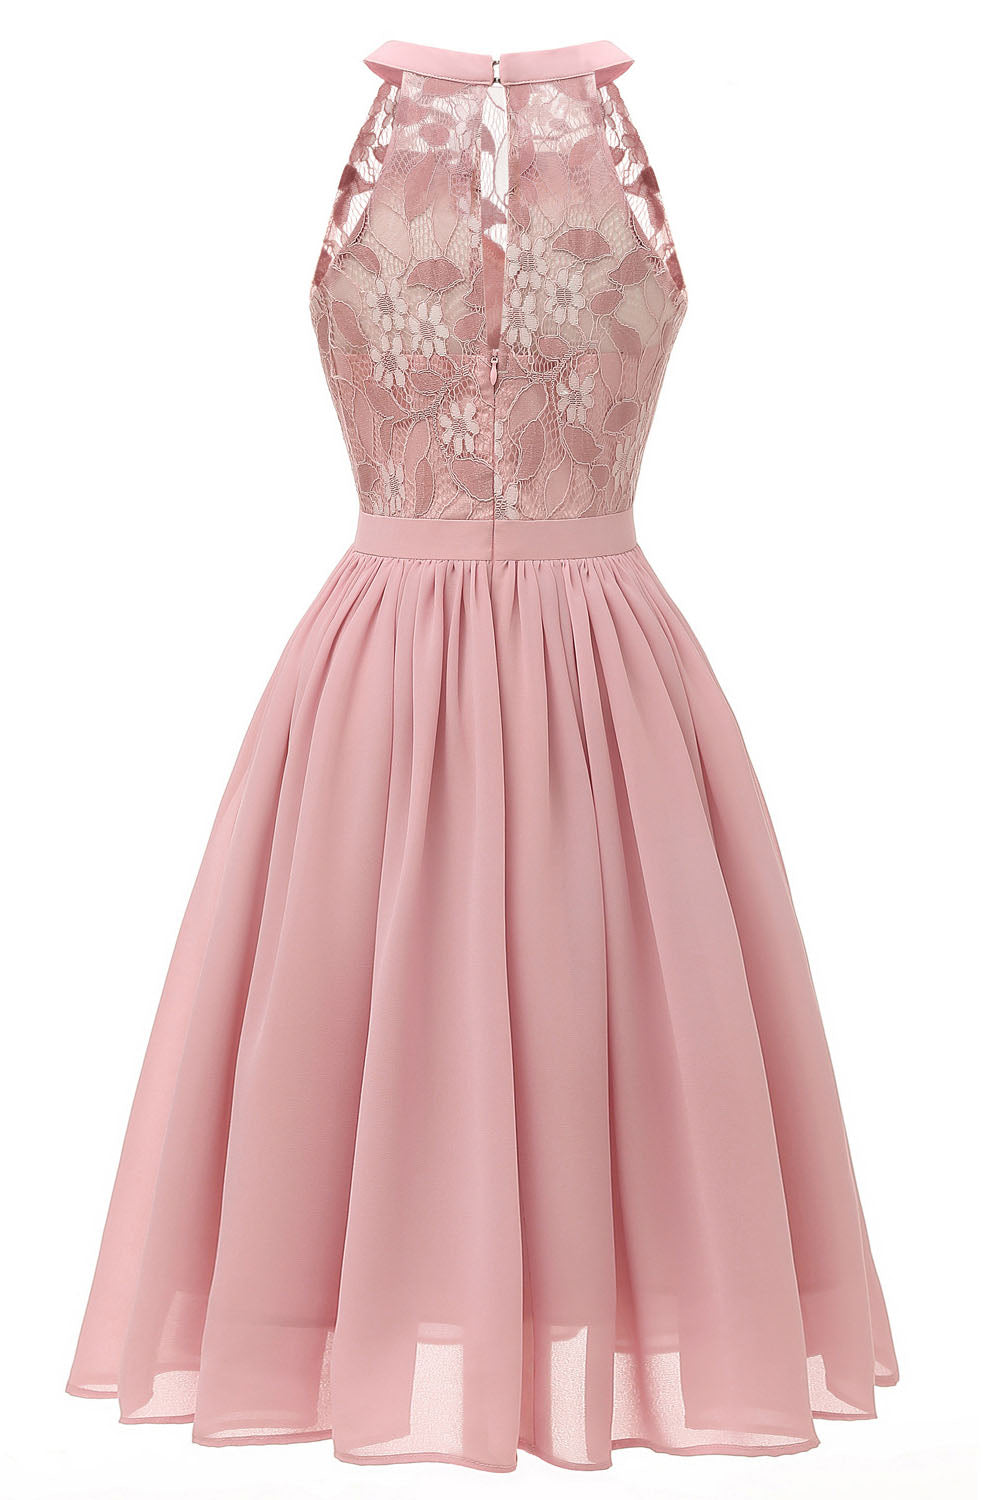 Sleeveless Short Pink Party Dress with Lace – FancyVestido